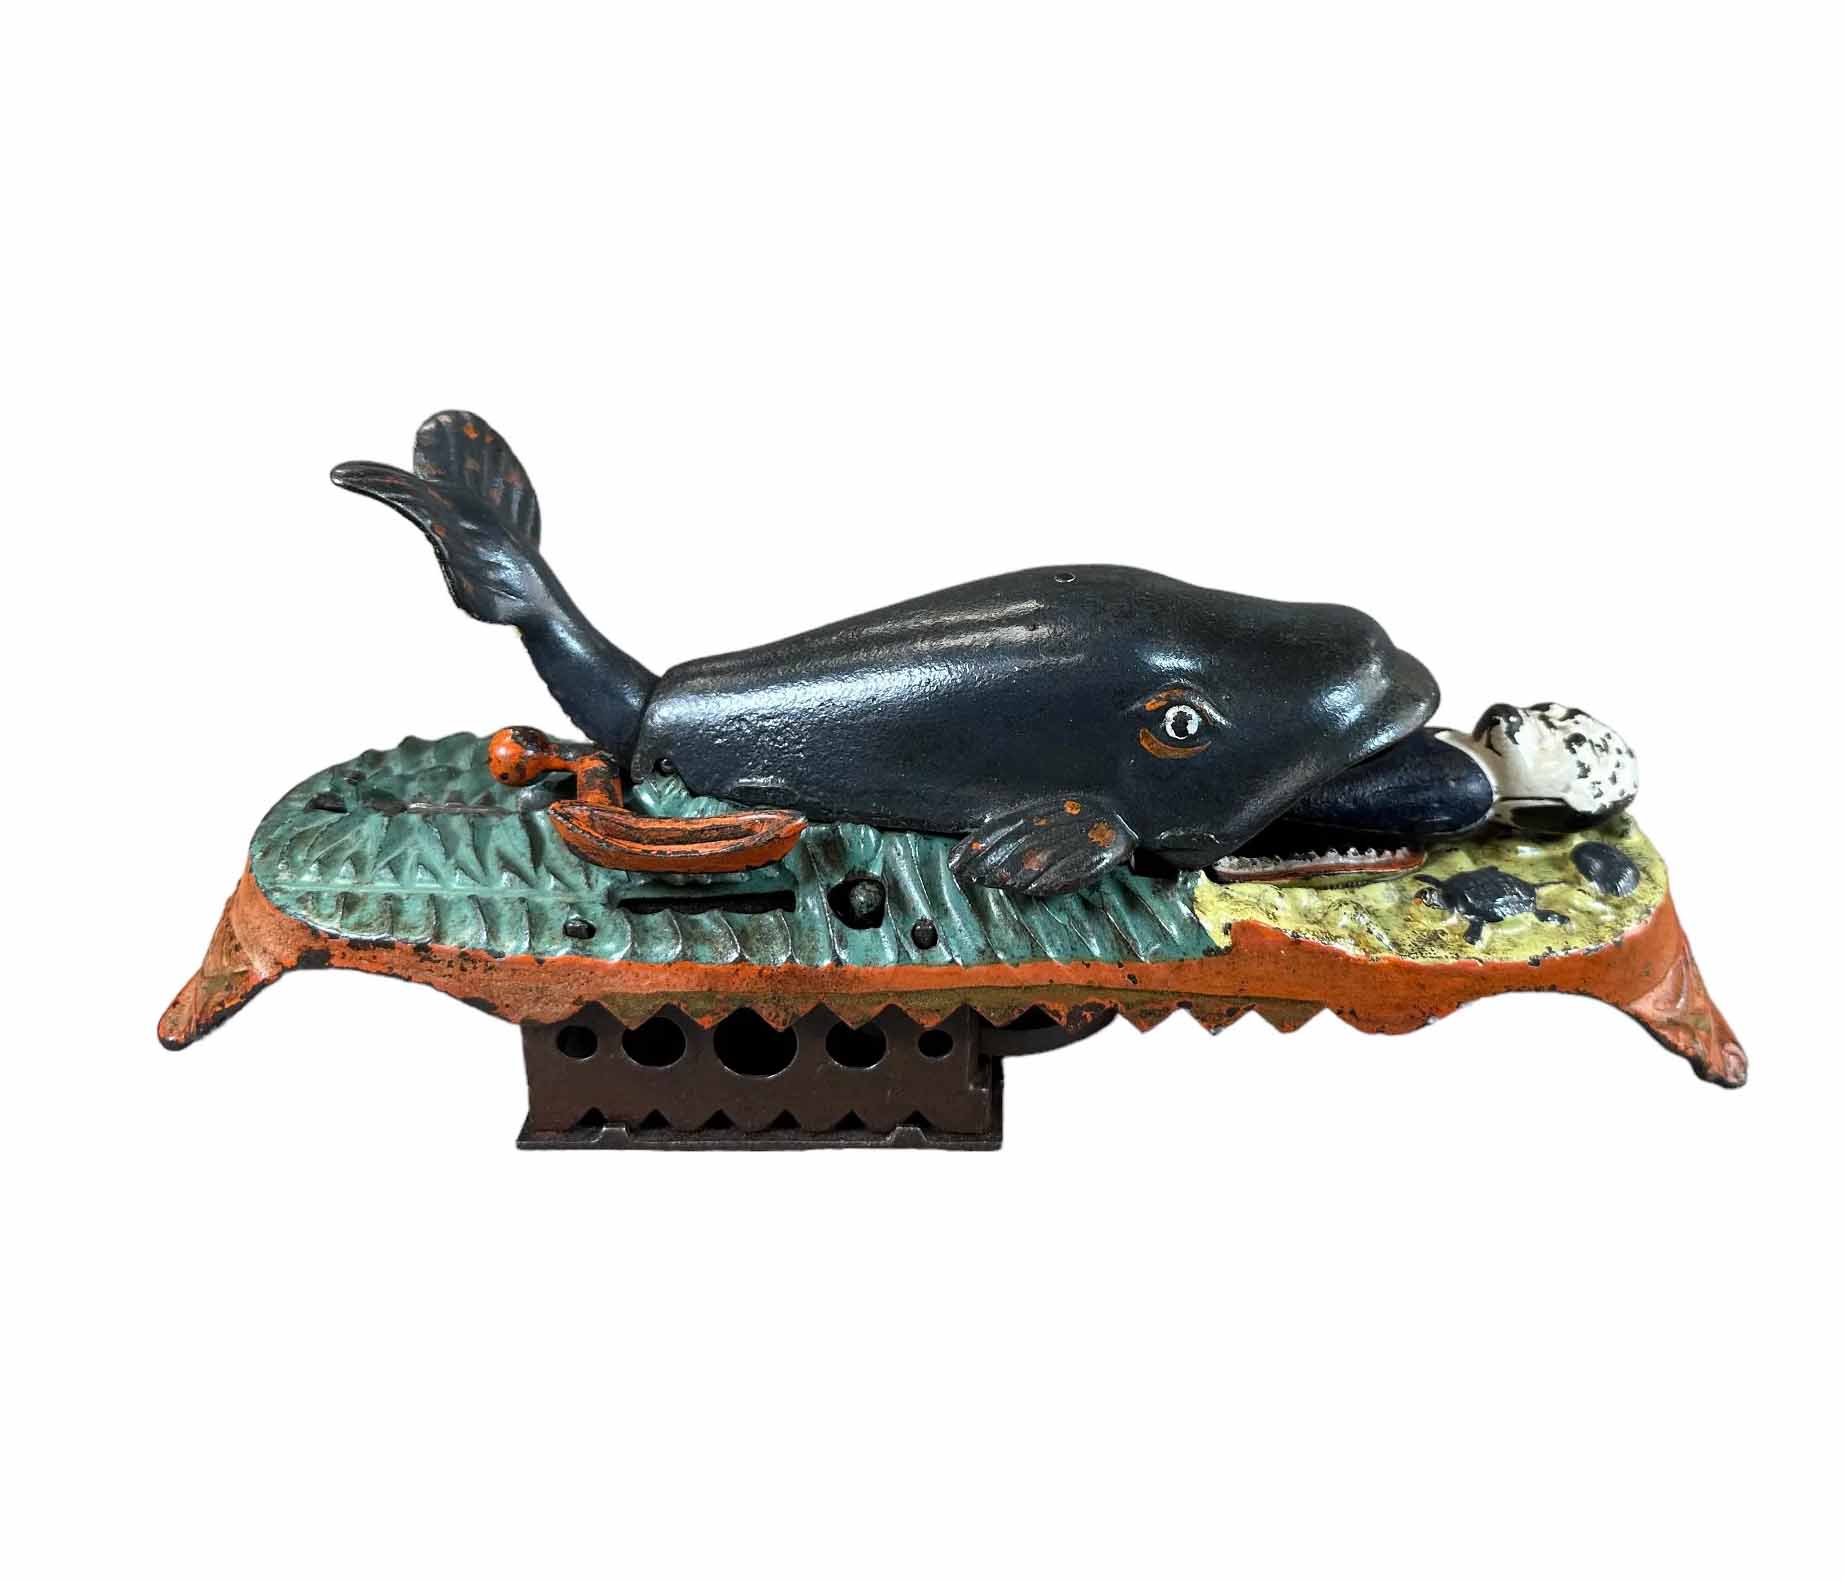 J&E Stevens Co. Jonah and the Whale mechanical bank, estimated at $80,000-$120,000 at Bertoia.